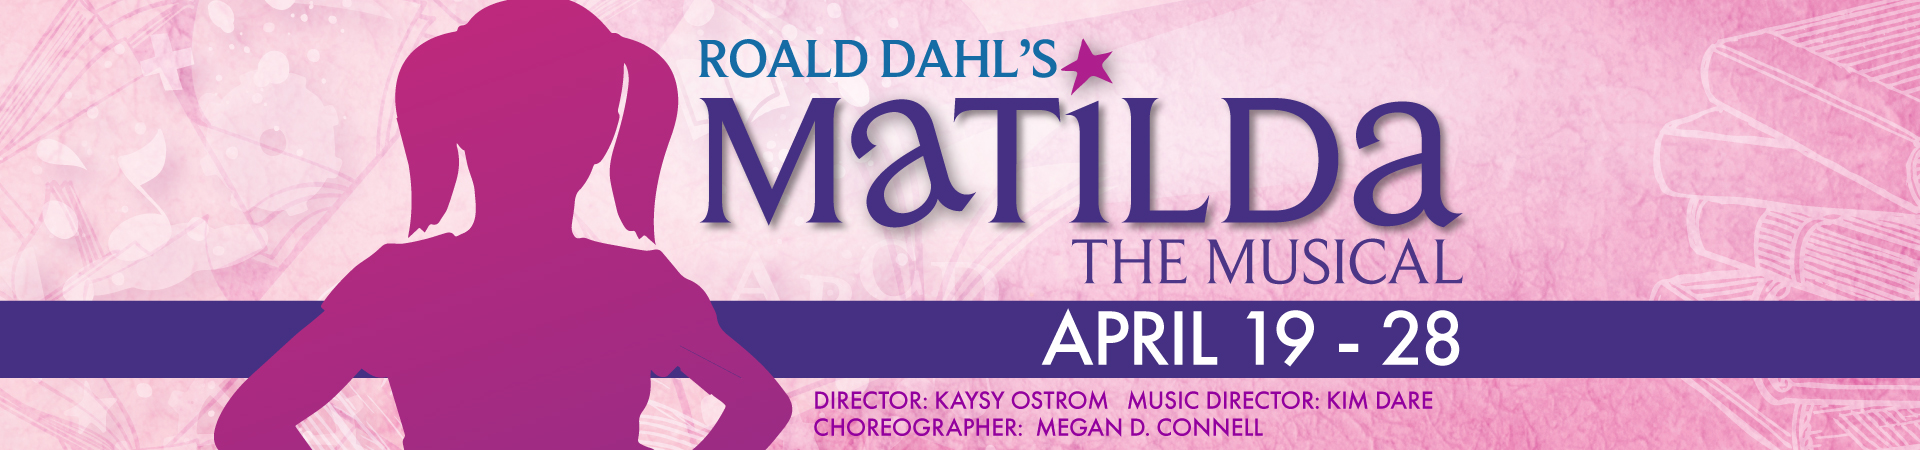 Pink slider with dark pink-purple silhouette of young girl with hands on hips. Small details buzz all around her, such as books, equations, stars. text reads, "Roald Dahl's Matilda."